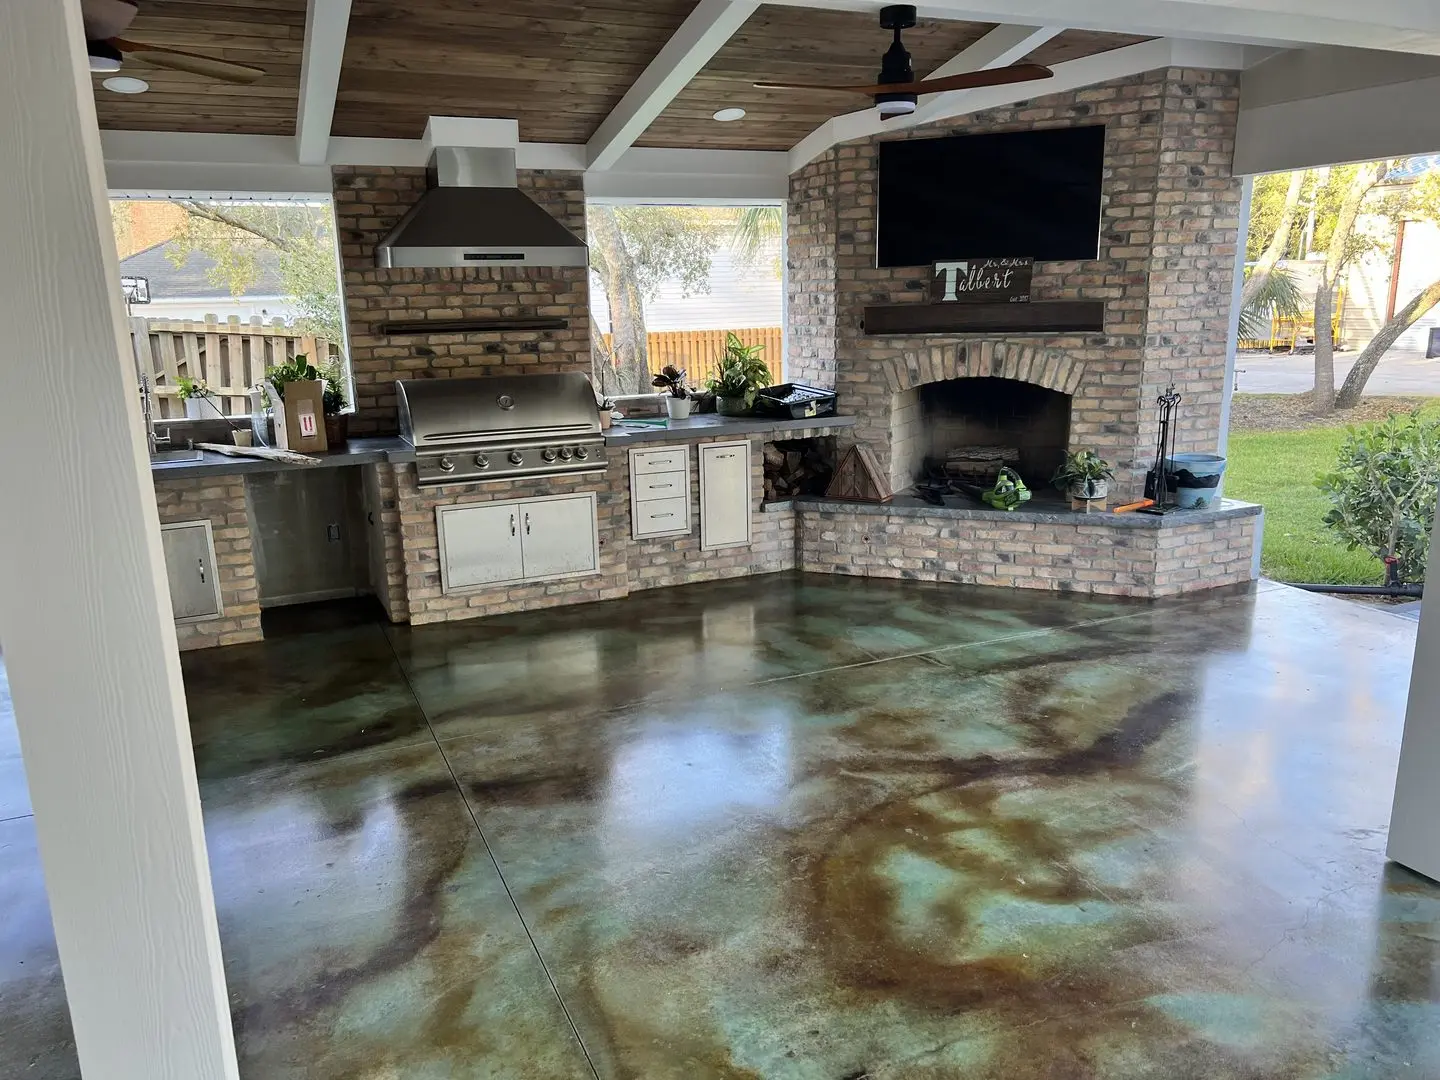 An image of a spacious outdoor porch featuring acid stained concrete floors in shades of Malayan Buff and Seagrass. The scene displays an elegant outdoor kitchen setup in the background